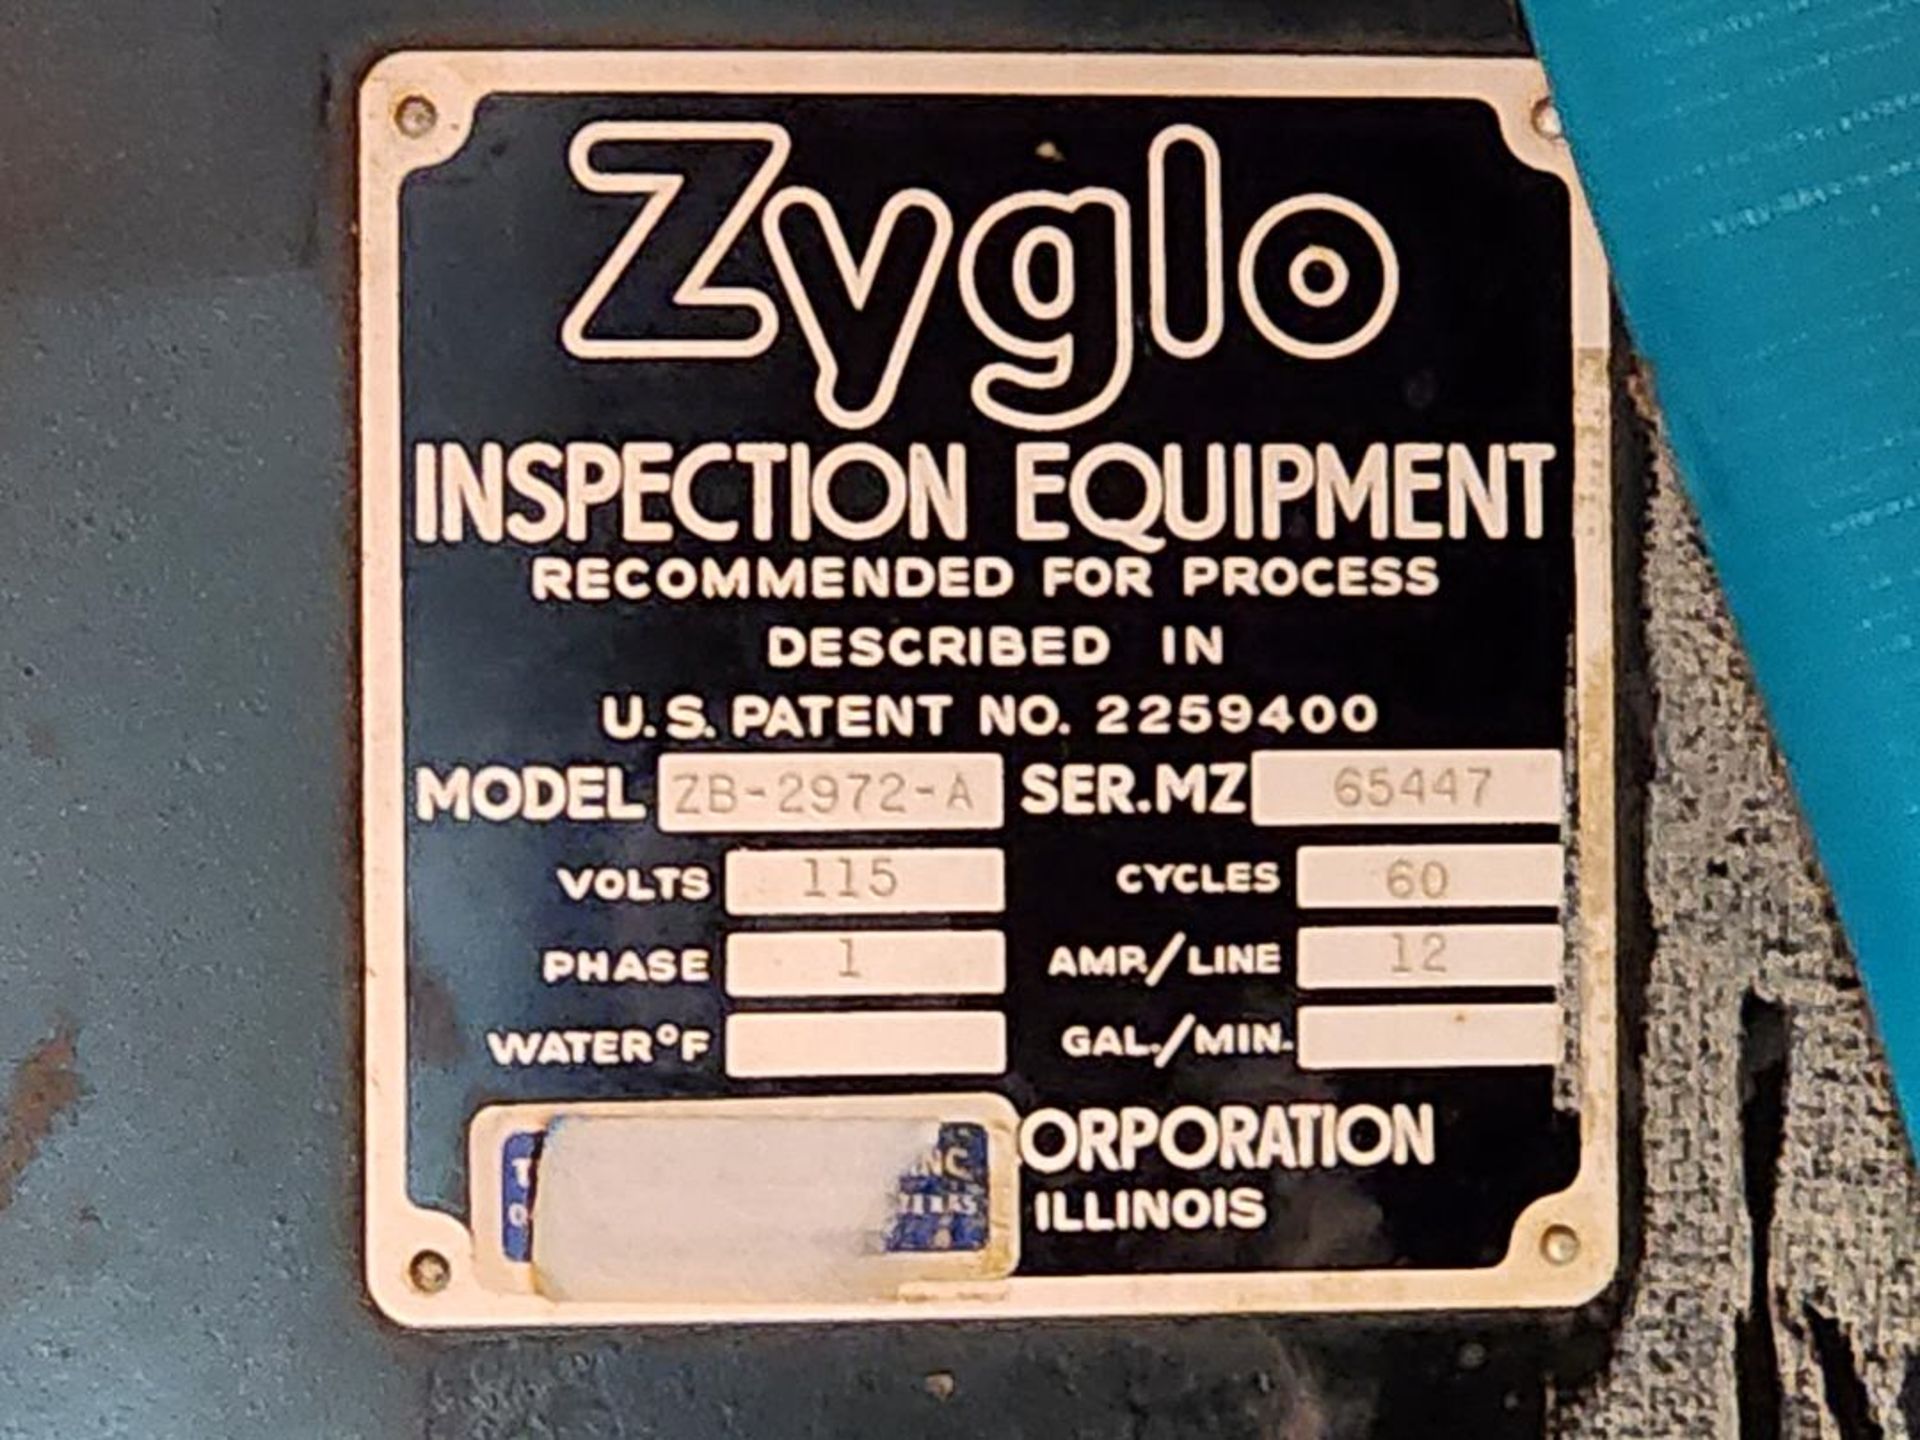 Zyglo Testing Oven W/ Honeywell Controller (Asset# 70607); W/ Magnaflux Inspection Station & - Image 22 of 27